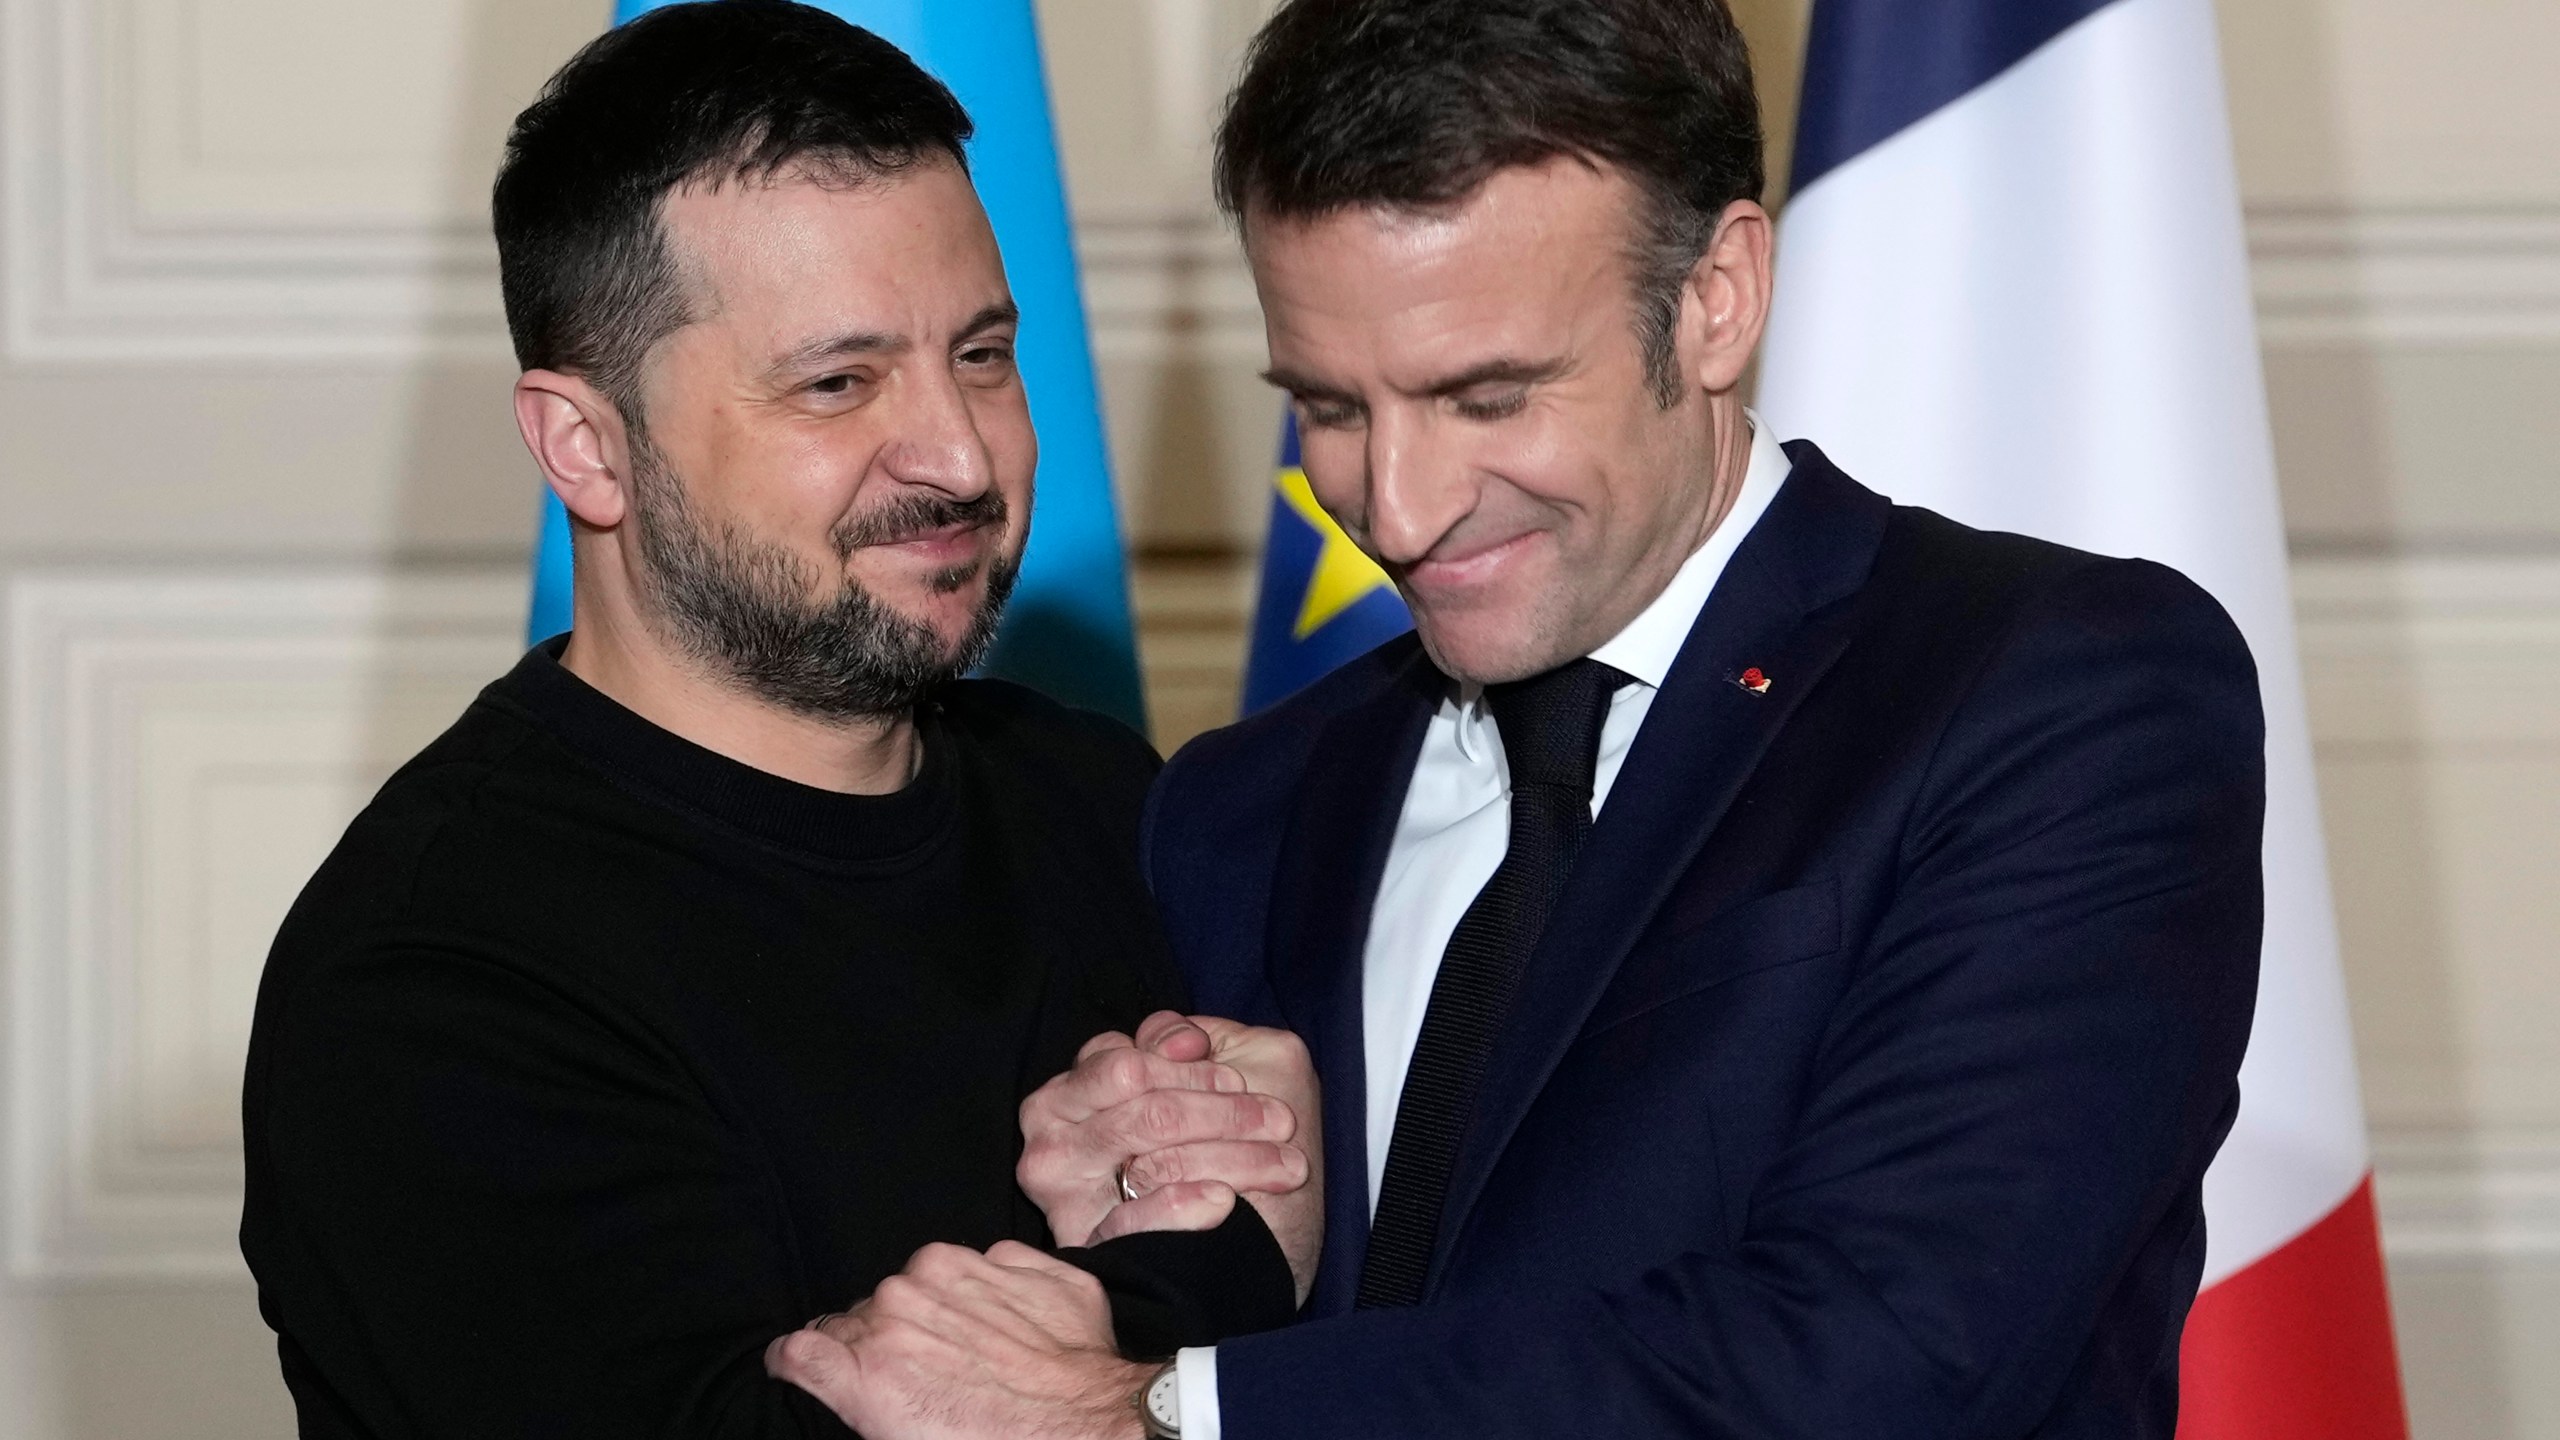 FILE - Ukrainian President Volodymyr Zelenskyy, left, and French President Emmanuel Macron shake hands after a press conference, on Feb. 16, 2024 at the Elysee Palace in Paris. French President Emmanuel Macron is to speak on national television on Thursday March 14, 2024 evening about how to further support Ukraine and the challenges faced by Europe, after saying last month the possibility of sending Western troops in the war-torn country could not be ruled out. (AP Photo/Thibault Camus, Pool, File)